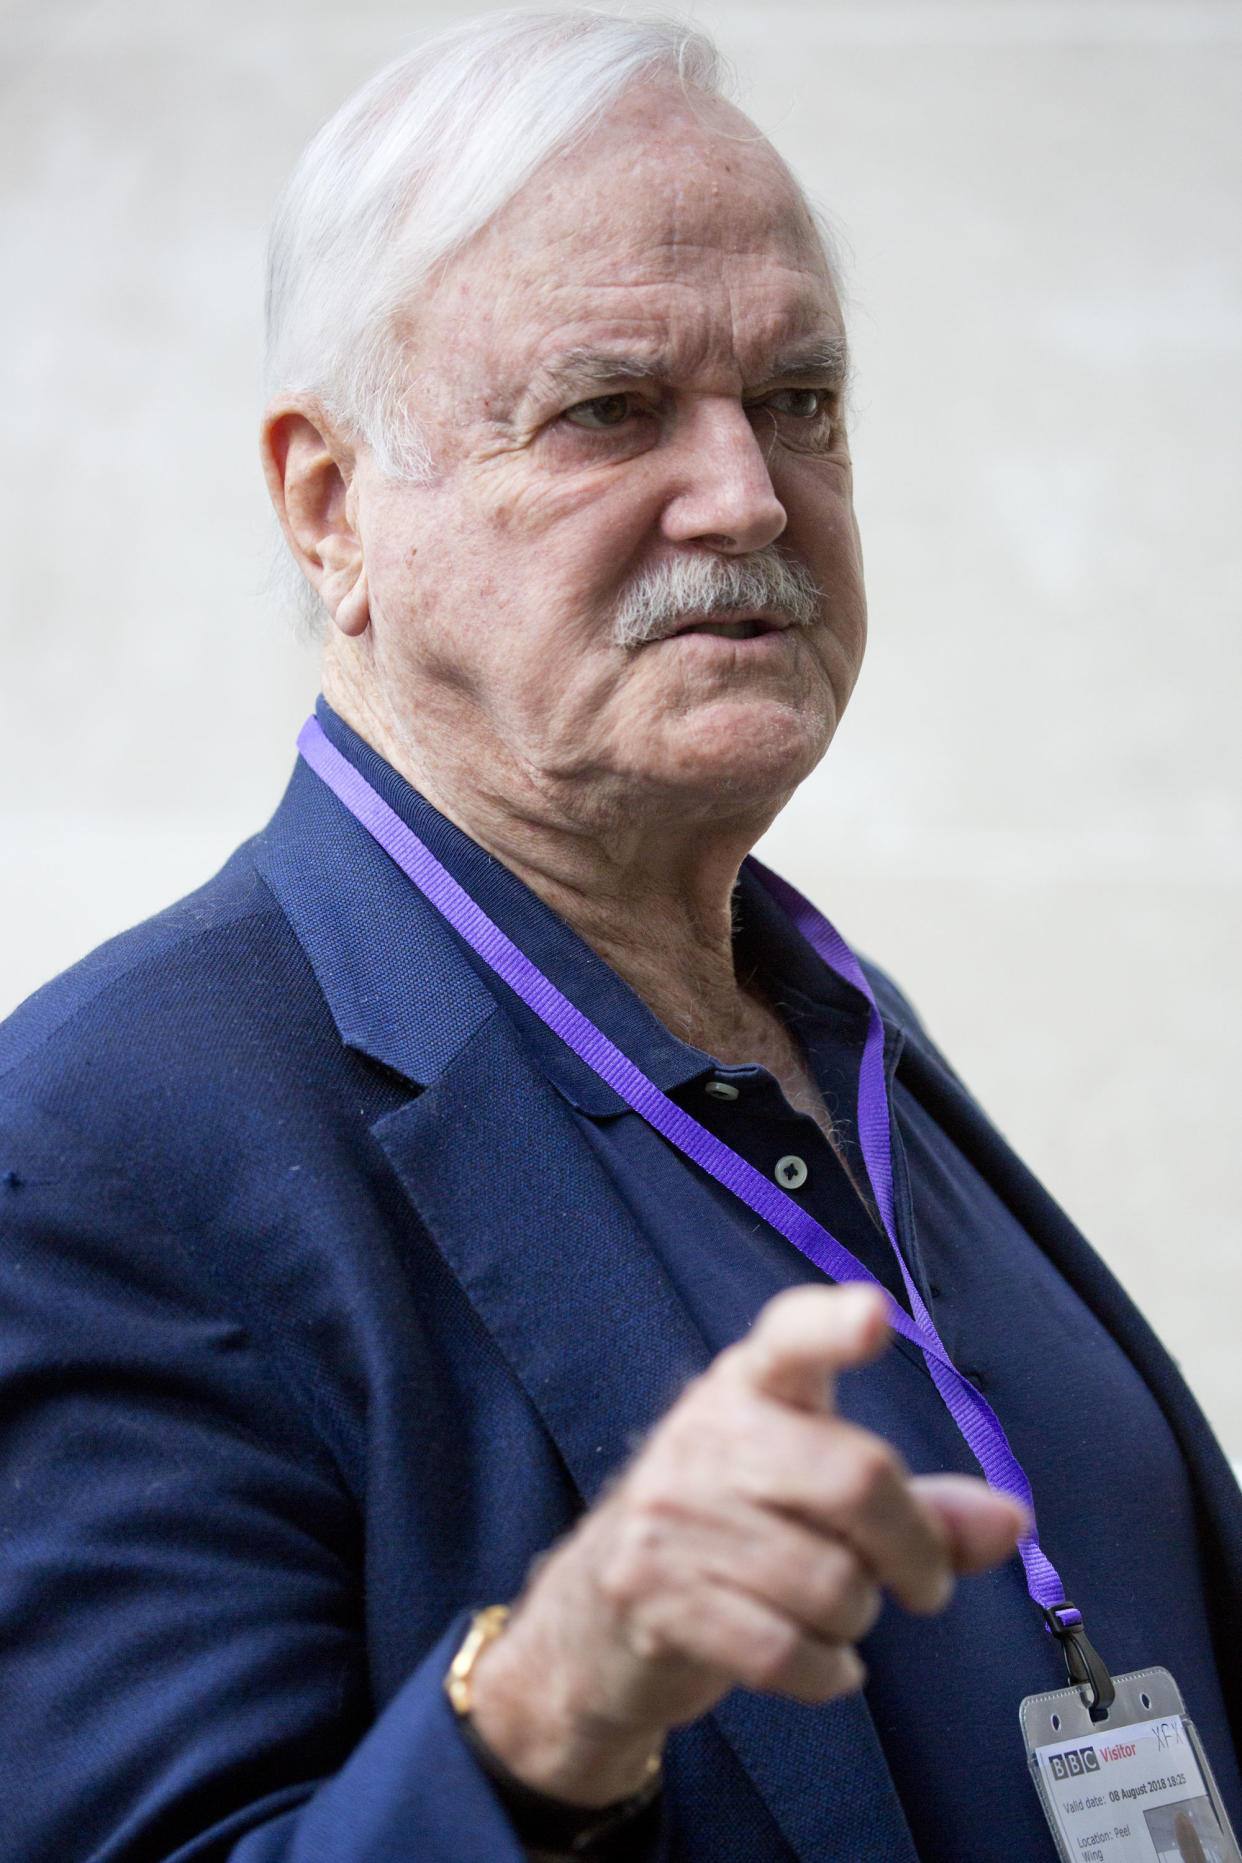 Actor John Cleese arriving at BBC Broadcasting House ahead of his appearance on The One Show in London. (Photo by Isabel Infantes/PA Images via Getty Images)